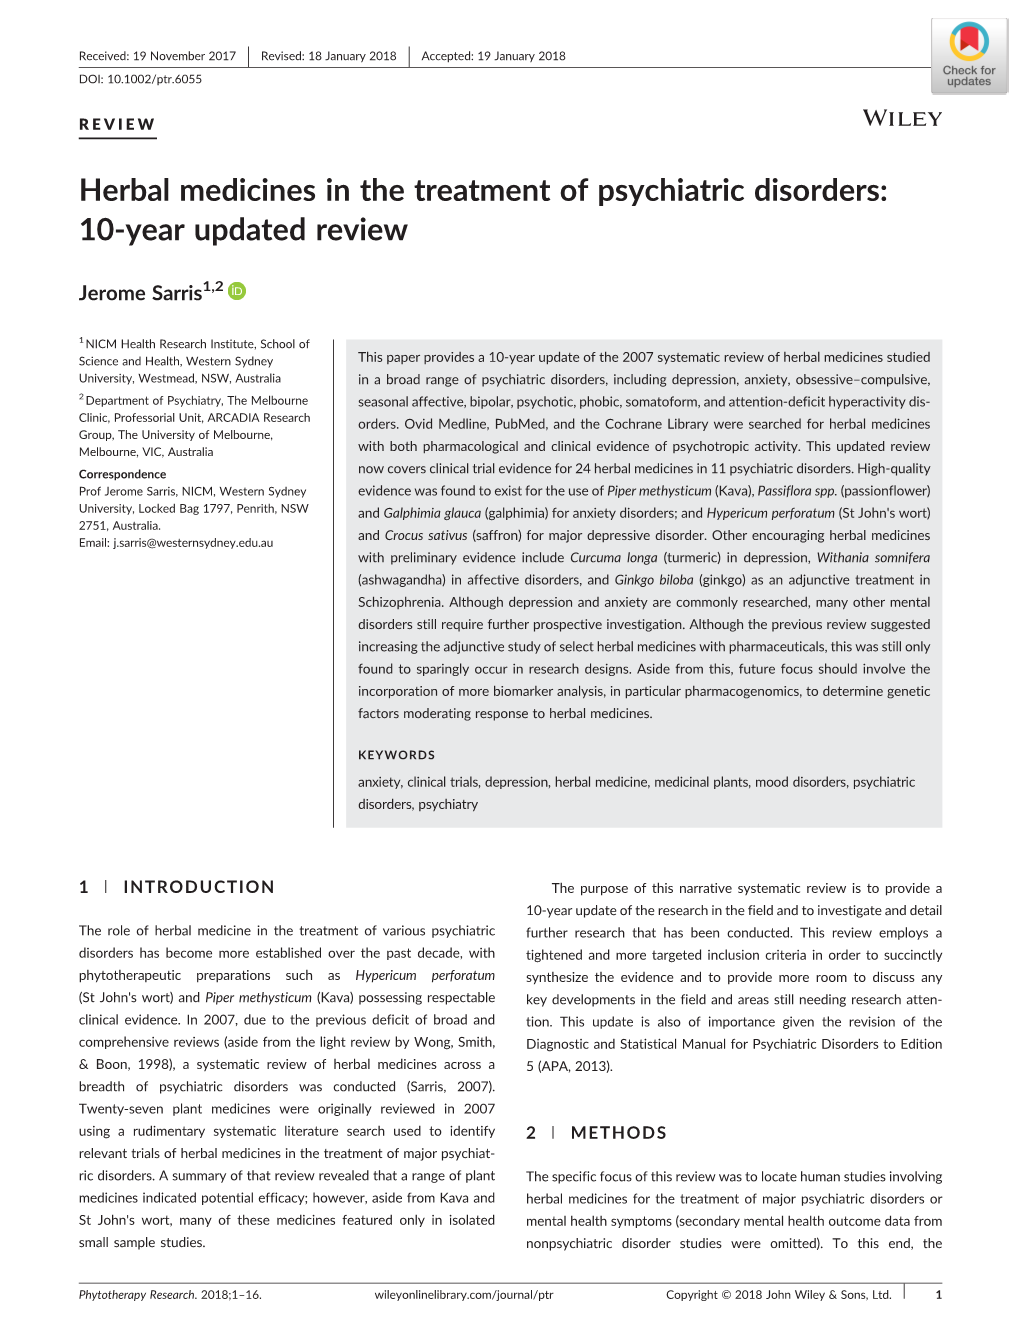 Herbal Medicines in the Treatment of Psychiatric Disorders: 10‐Year Updated Review